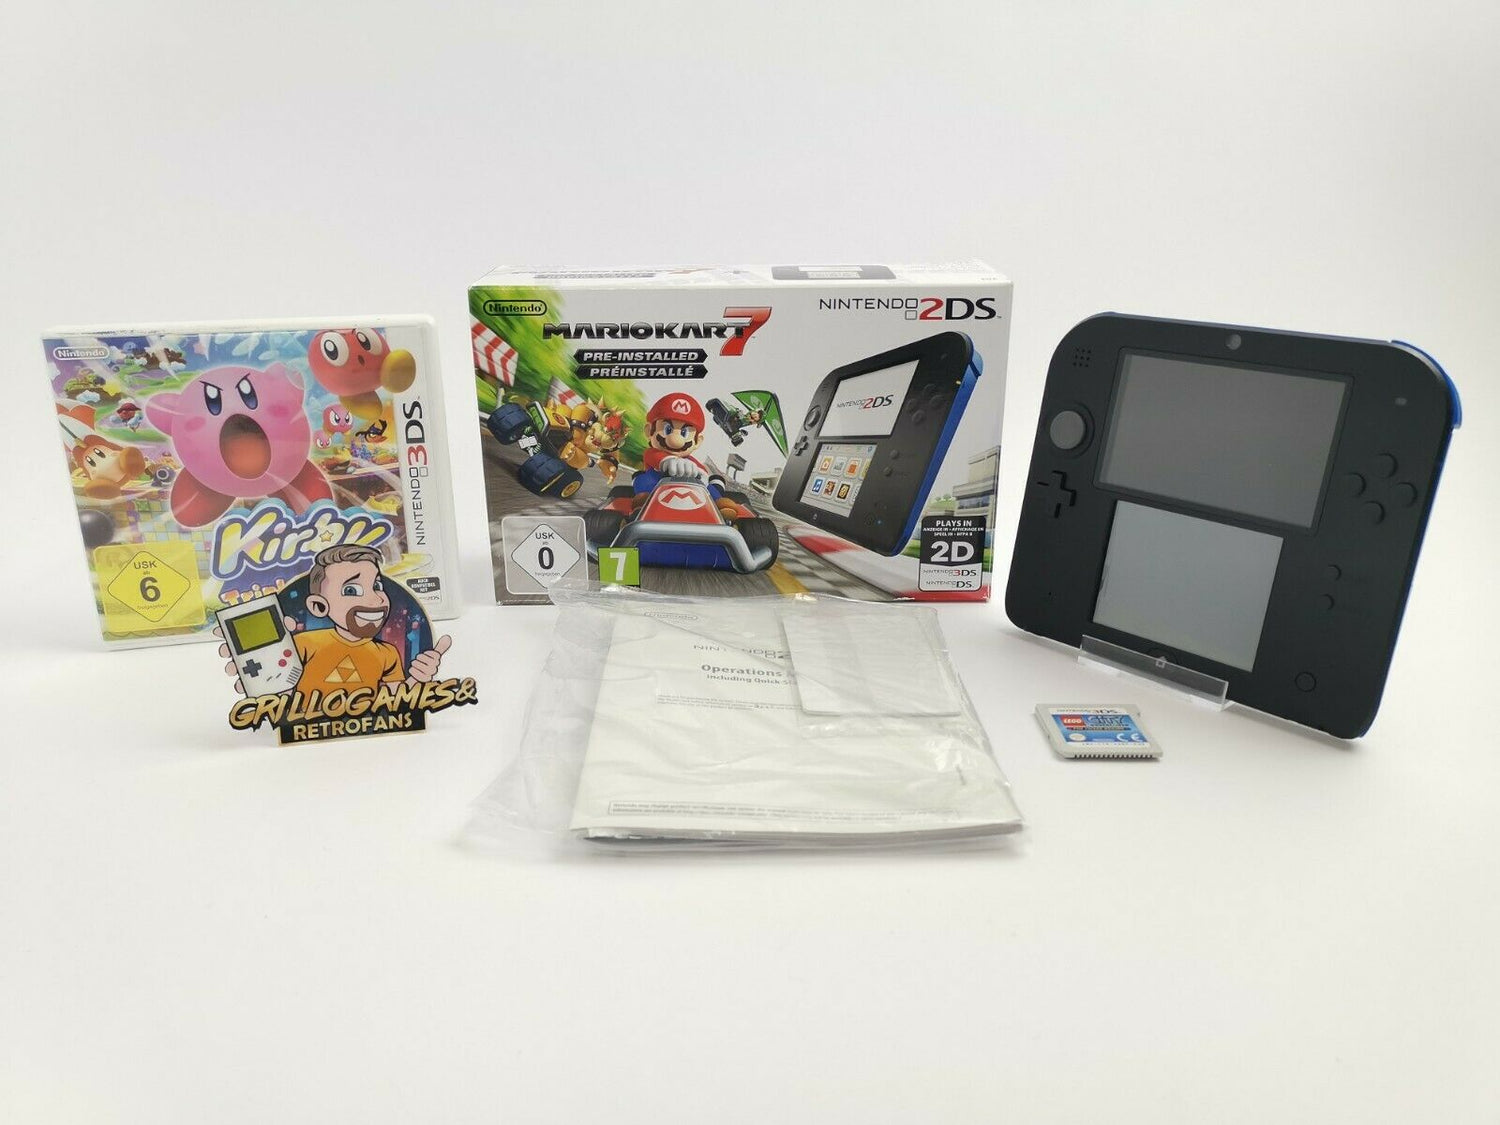 Nintendo 2ds console with Kirby and Lego City